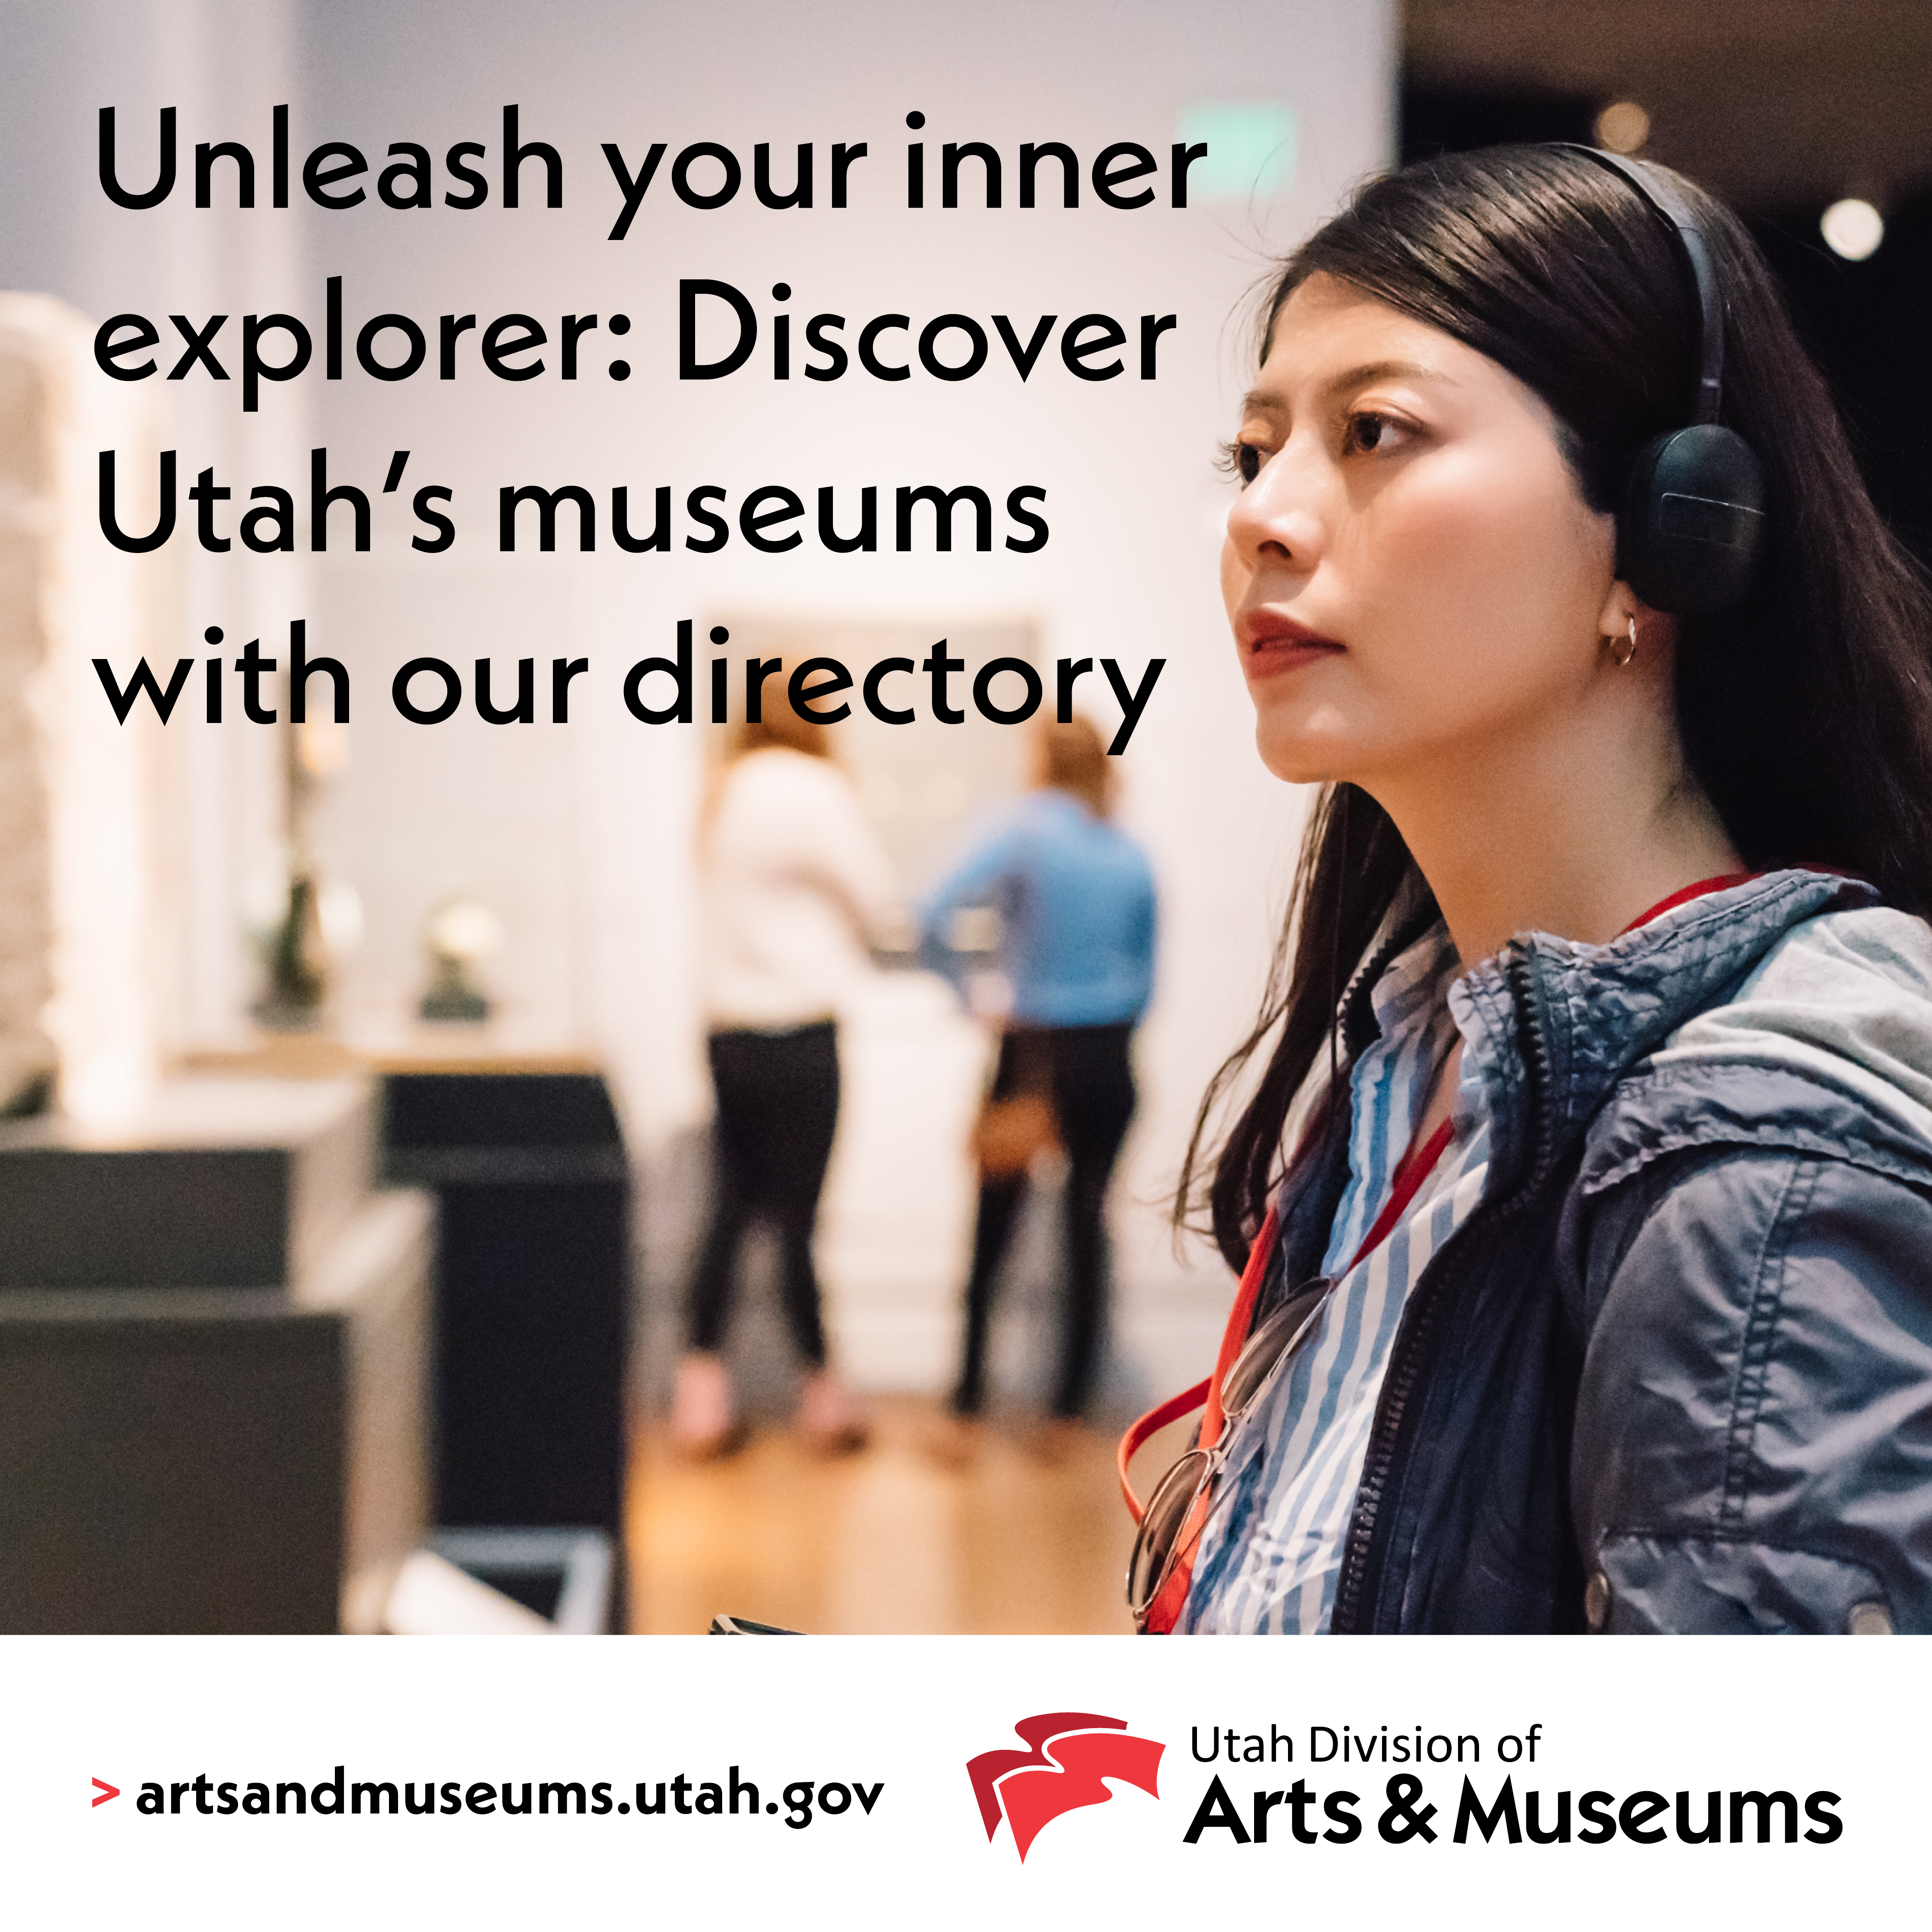 Unleash your inner explorer: Discover Utah's museums with our directory.